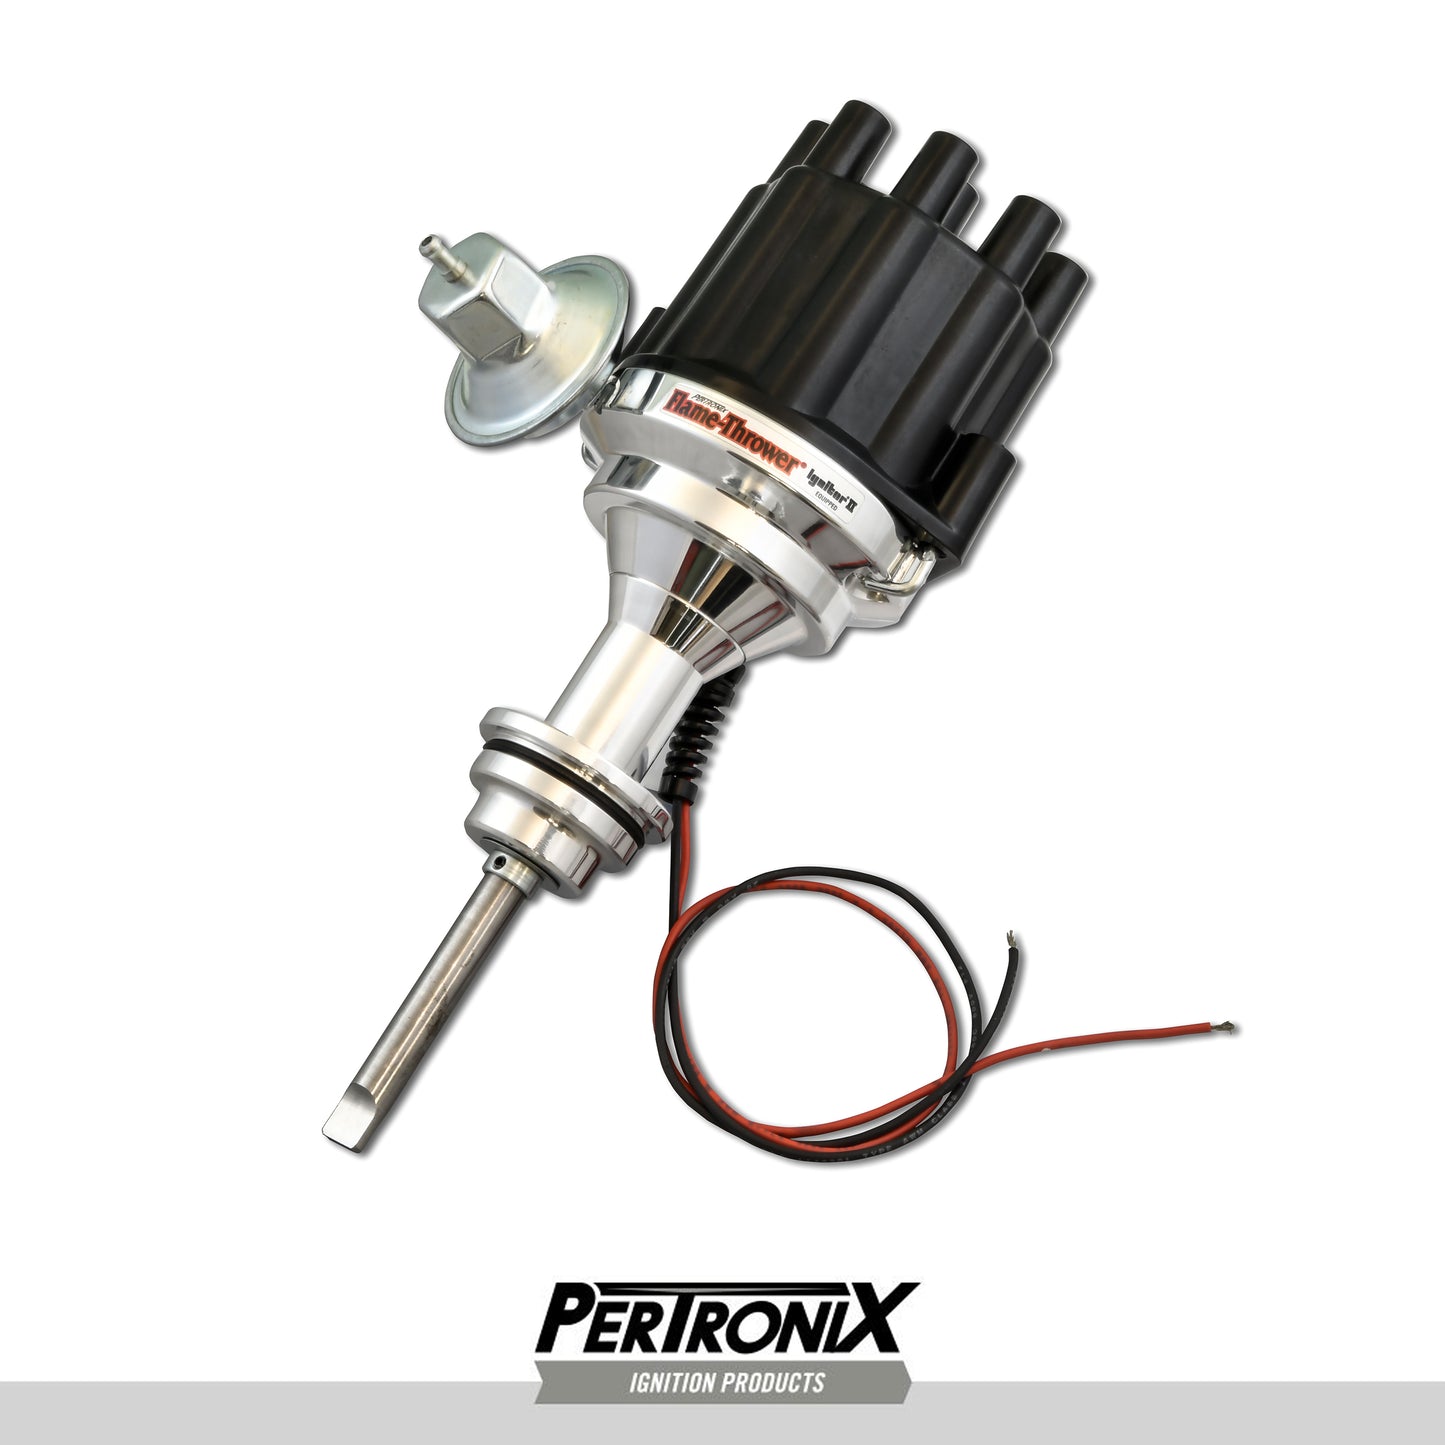 PerTronix Flame Thrower D144700 Billet Distributor with Ignitor II Chrysler